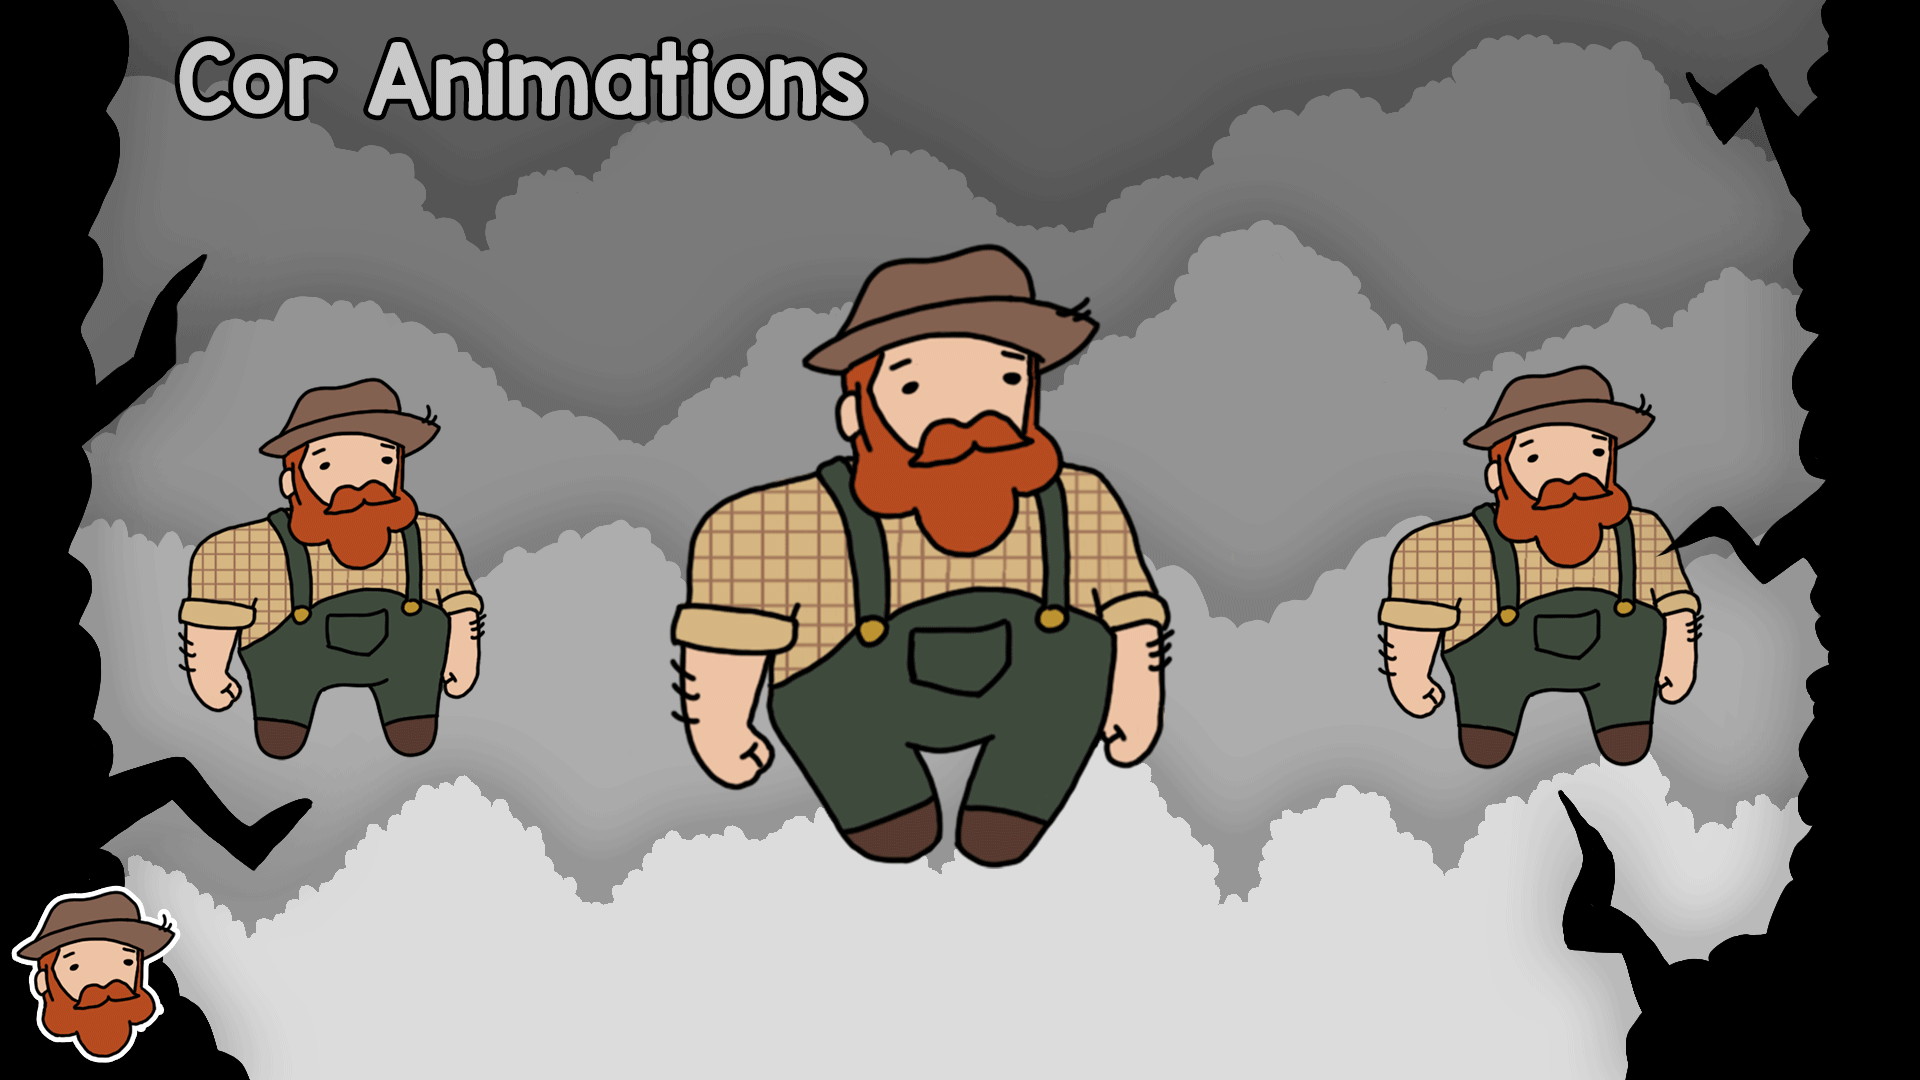 Animations I made for our beautiful main character Cor